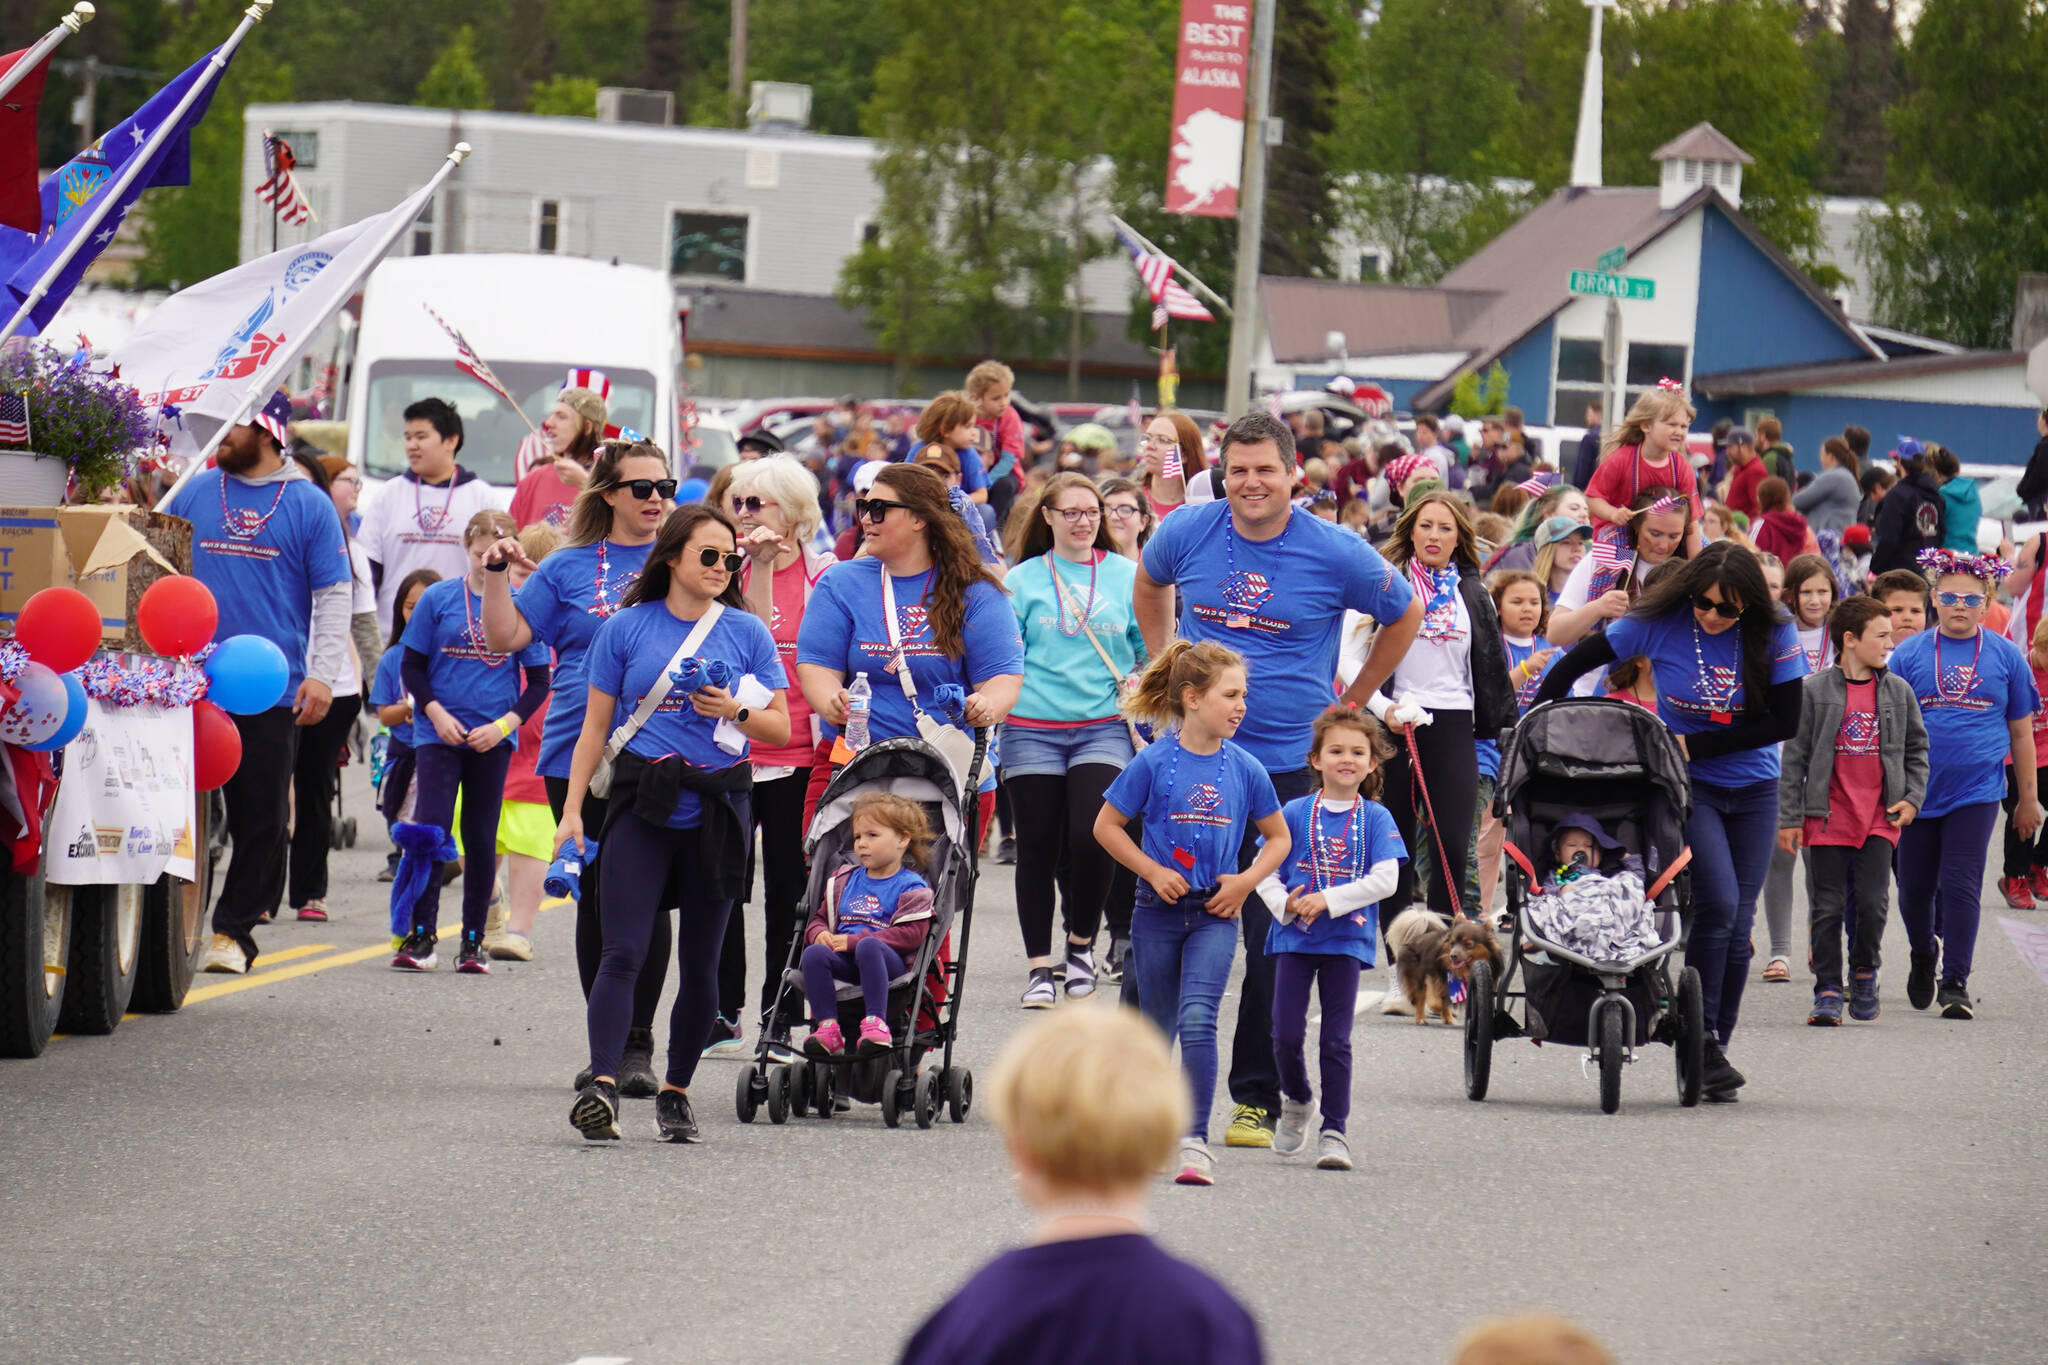 The Boys & Girls Clubs of the Kenai Peninsula smile and wave as the Fourth of July Parade moves down the Kenai Spur Highway in Kenai, Alaska on Tuesday, July 4, 2023. (Jake Dye/Peninsula Clarion)